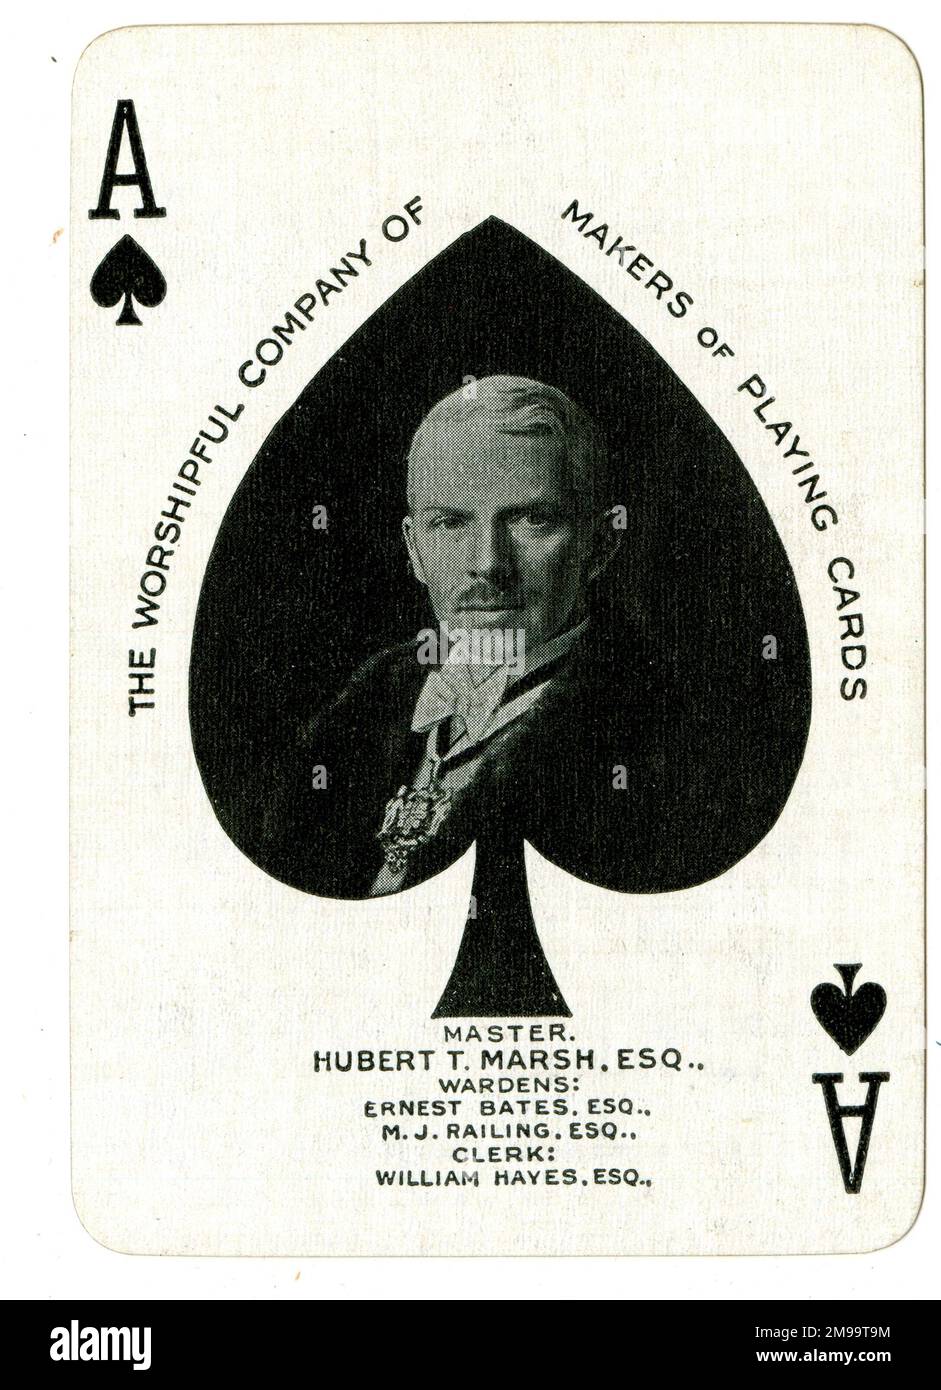 Hubert T. Marsh, Master of the Worshipful Company of Makers of Playing Cards, auf einer Pik-Ass-Spielkarte. Stockfoto